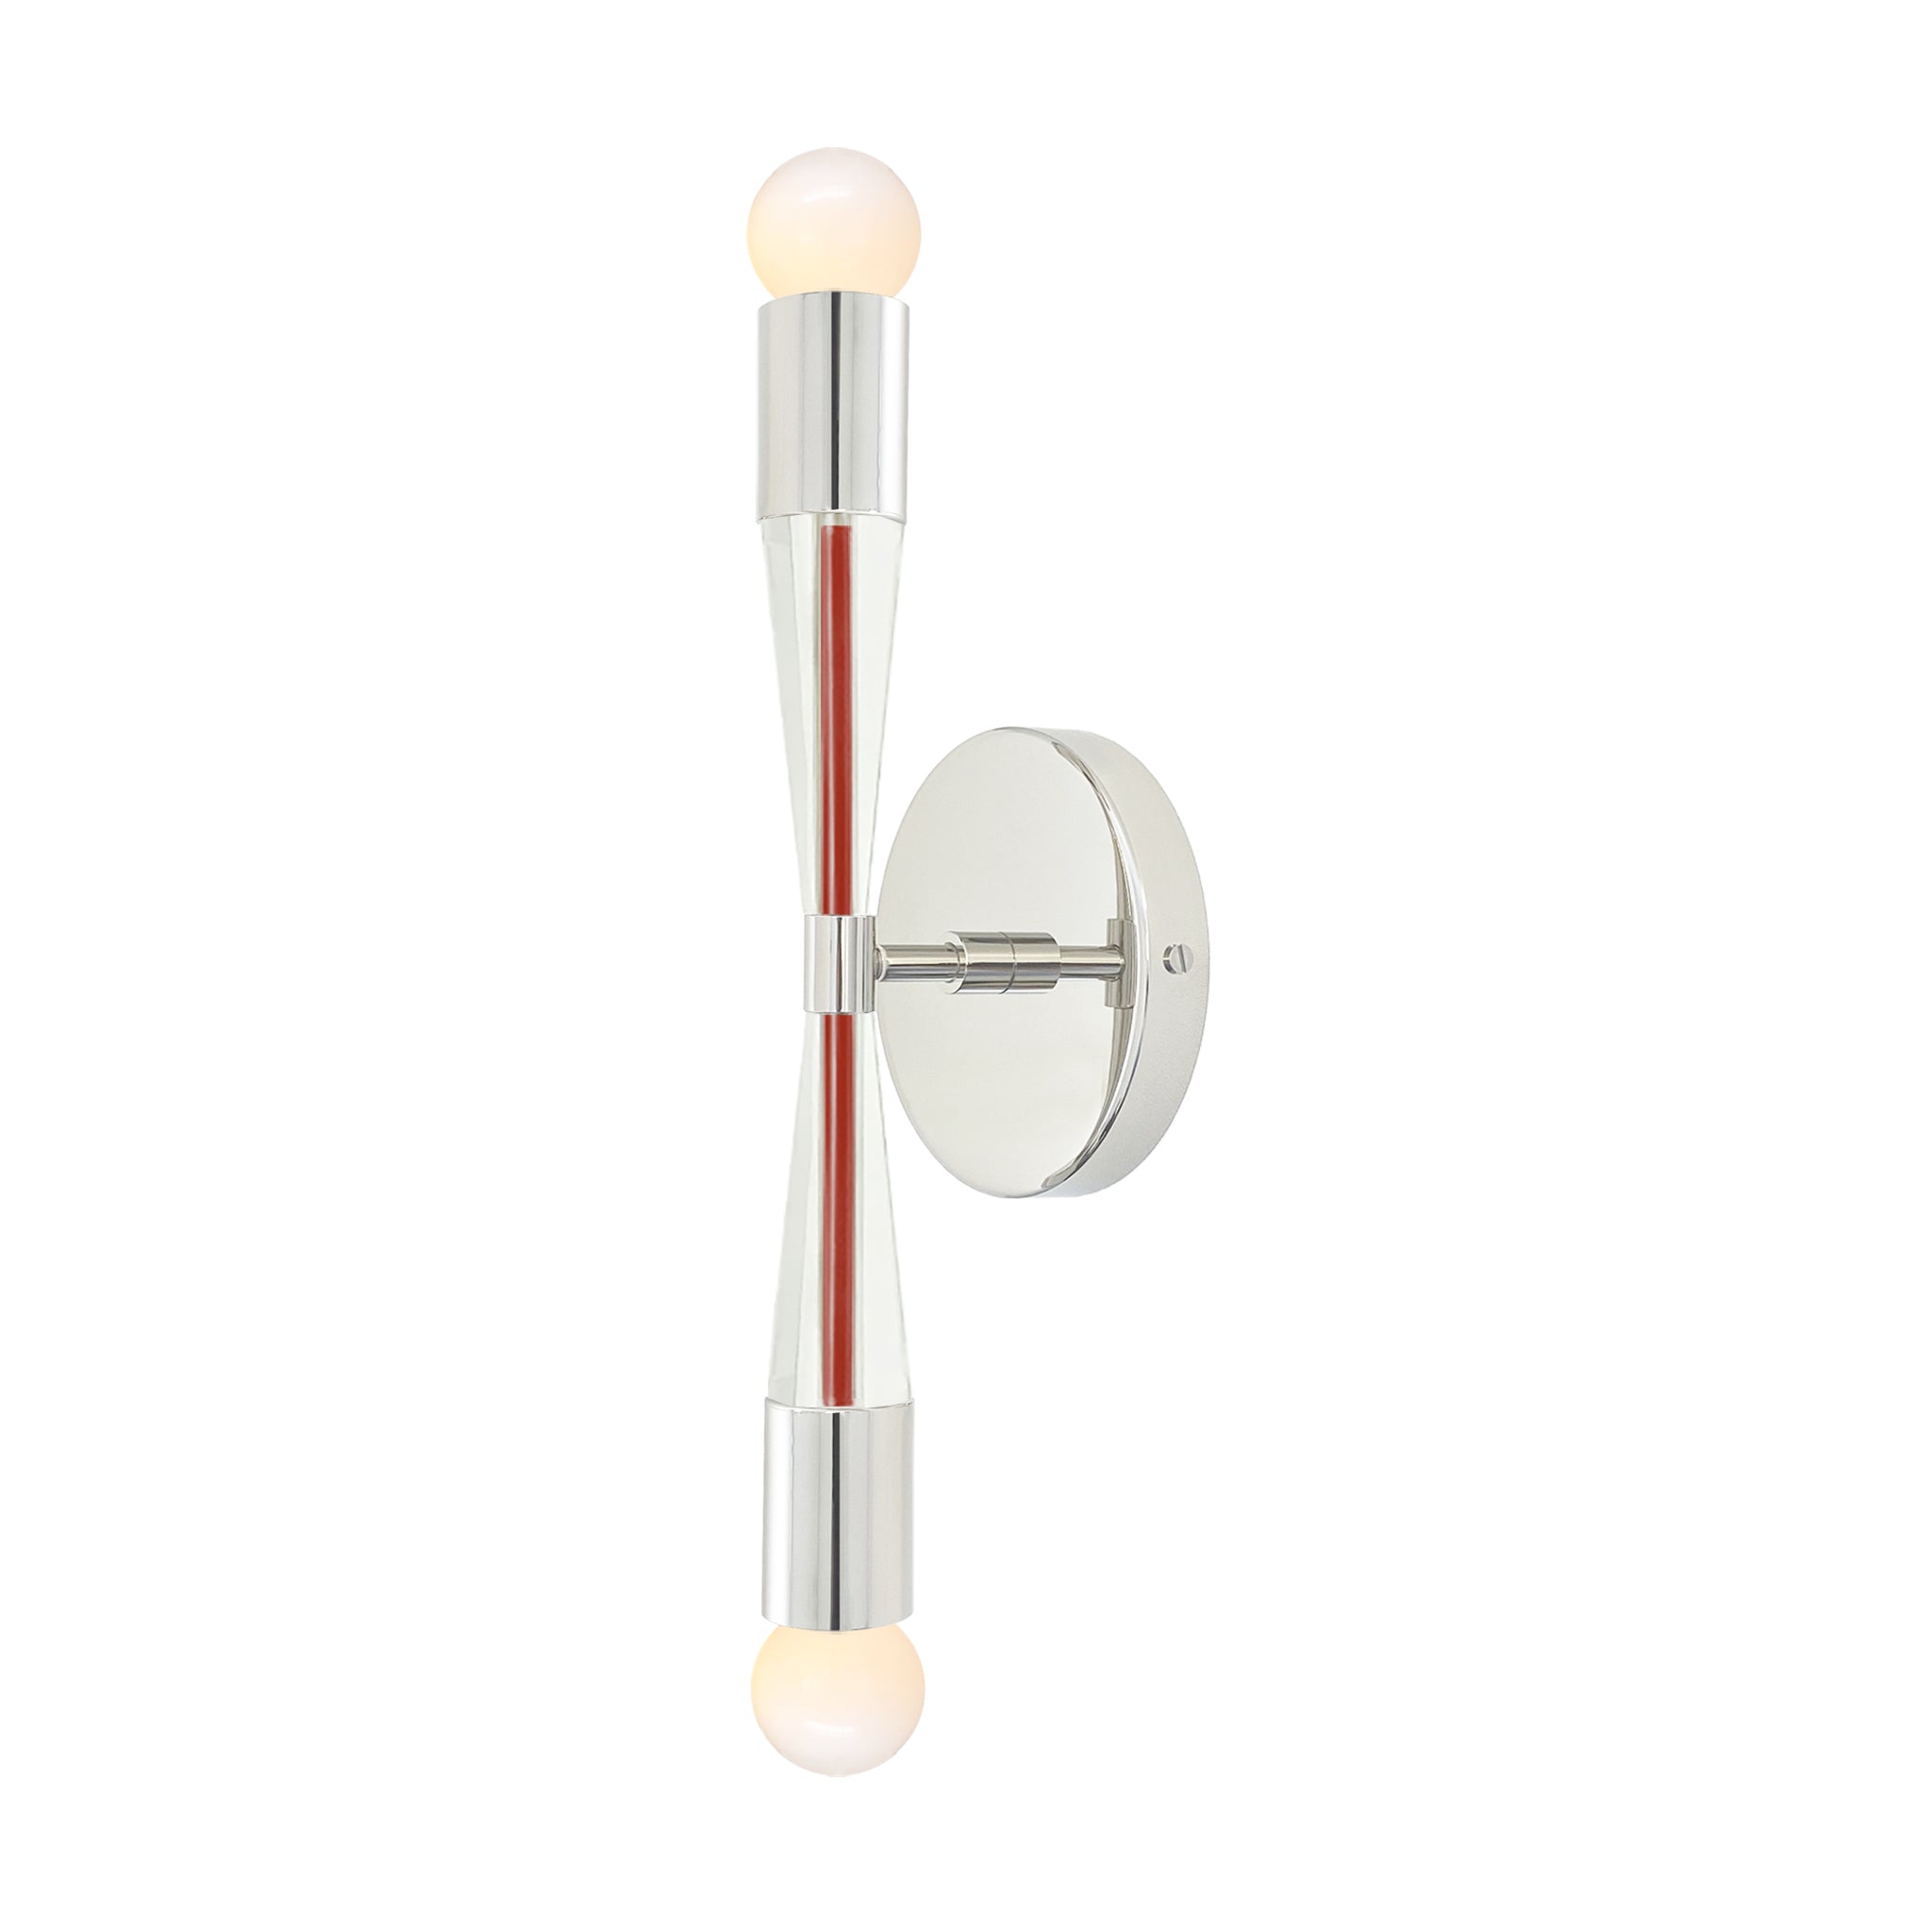 Nickel and riding hood red color Phoenix sconce Dutton Brown lighting